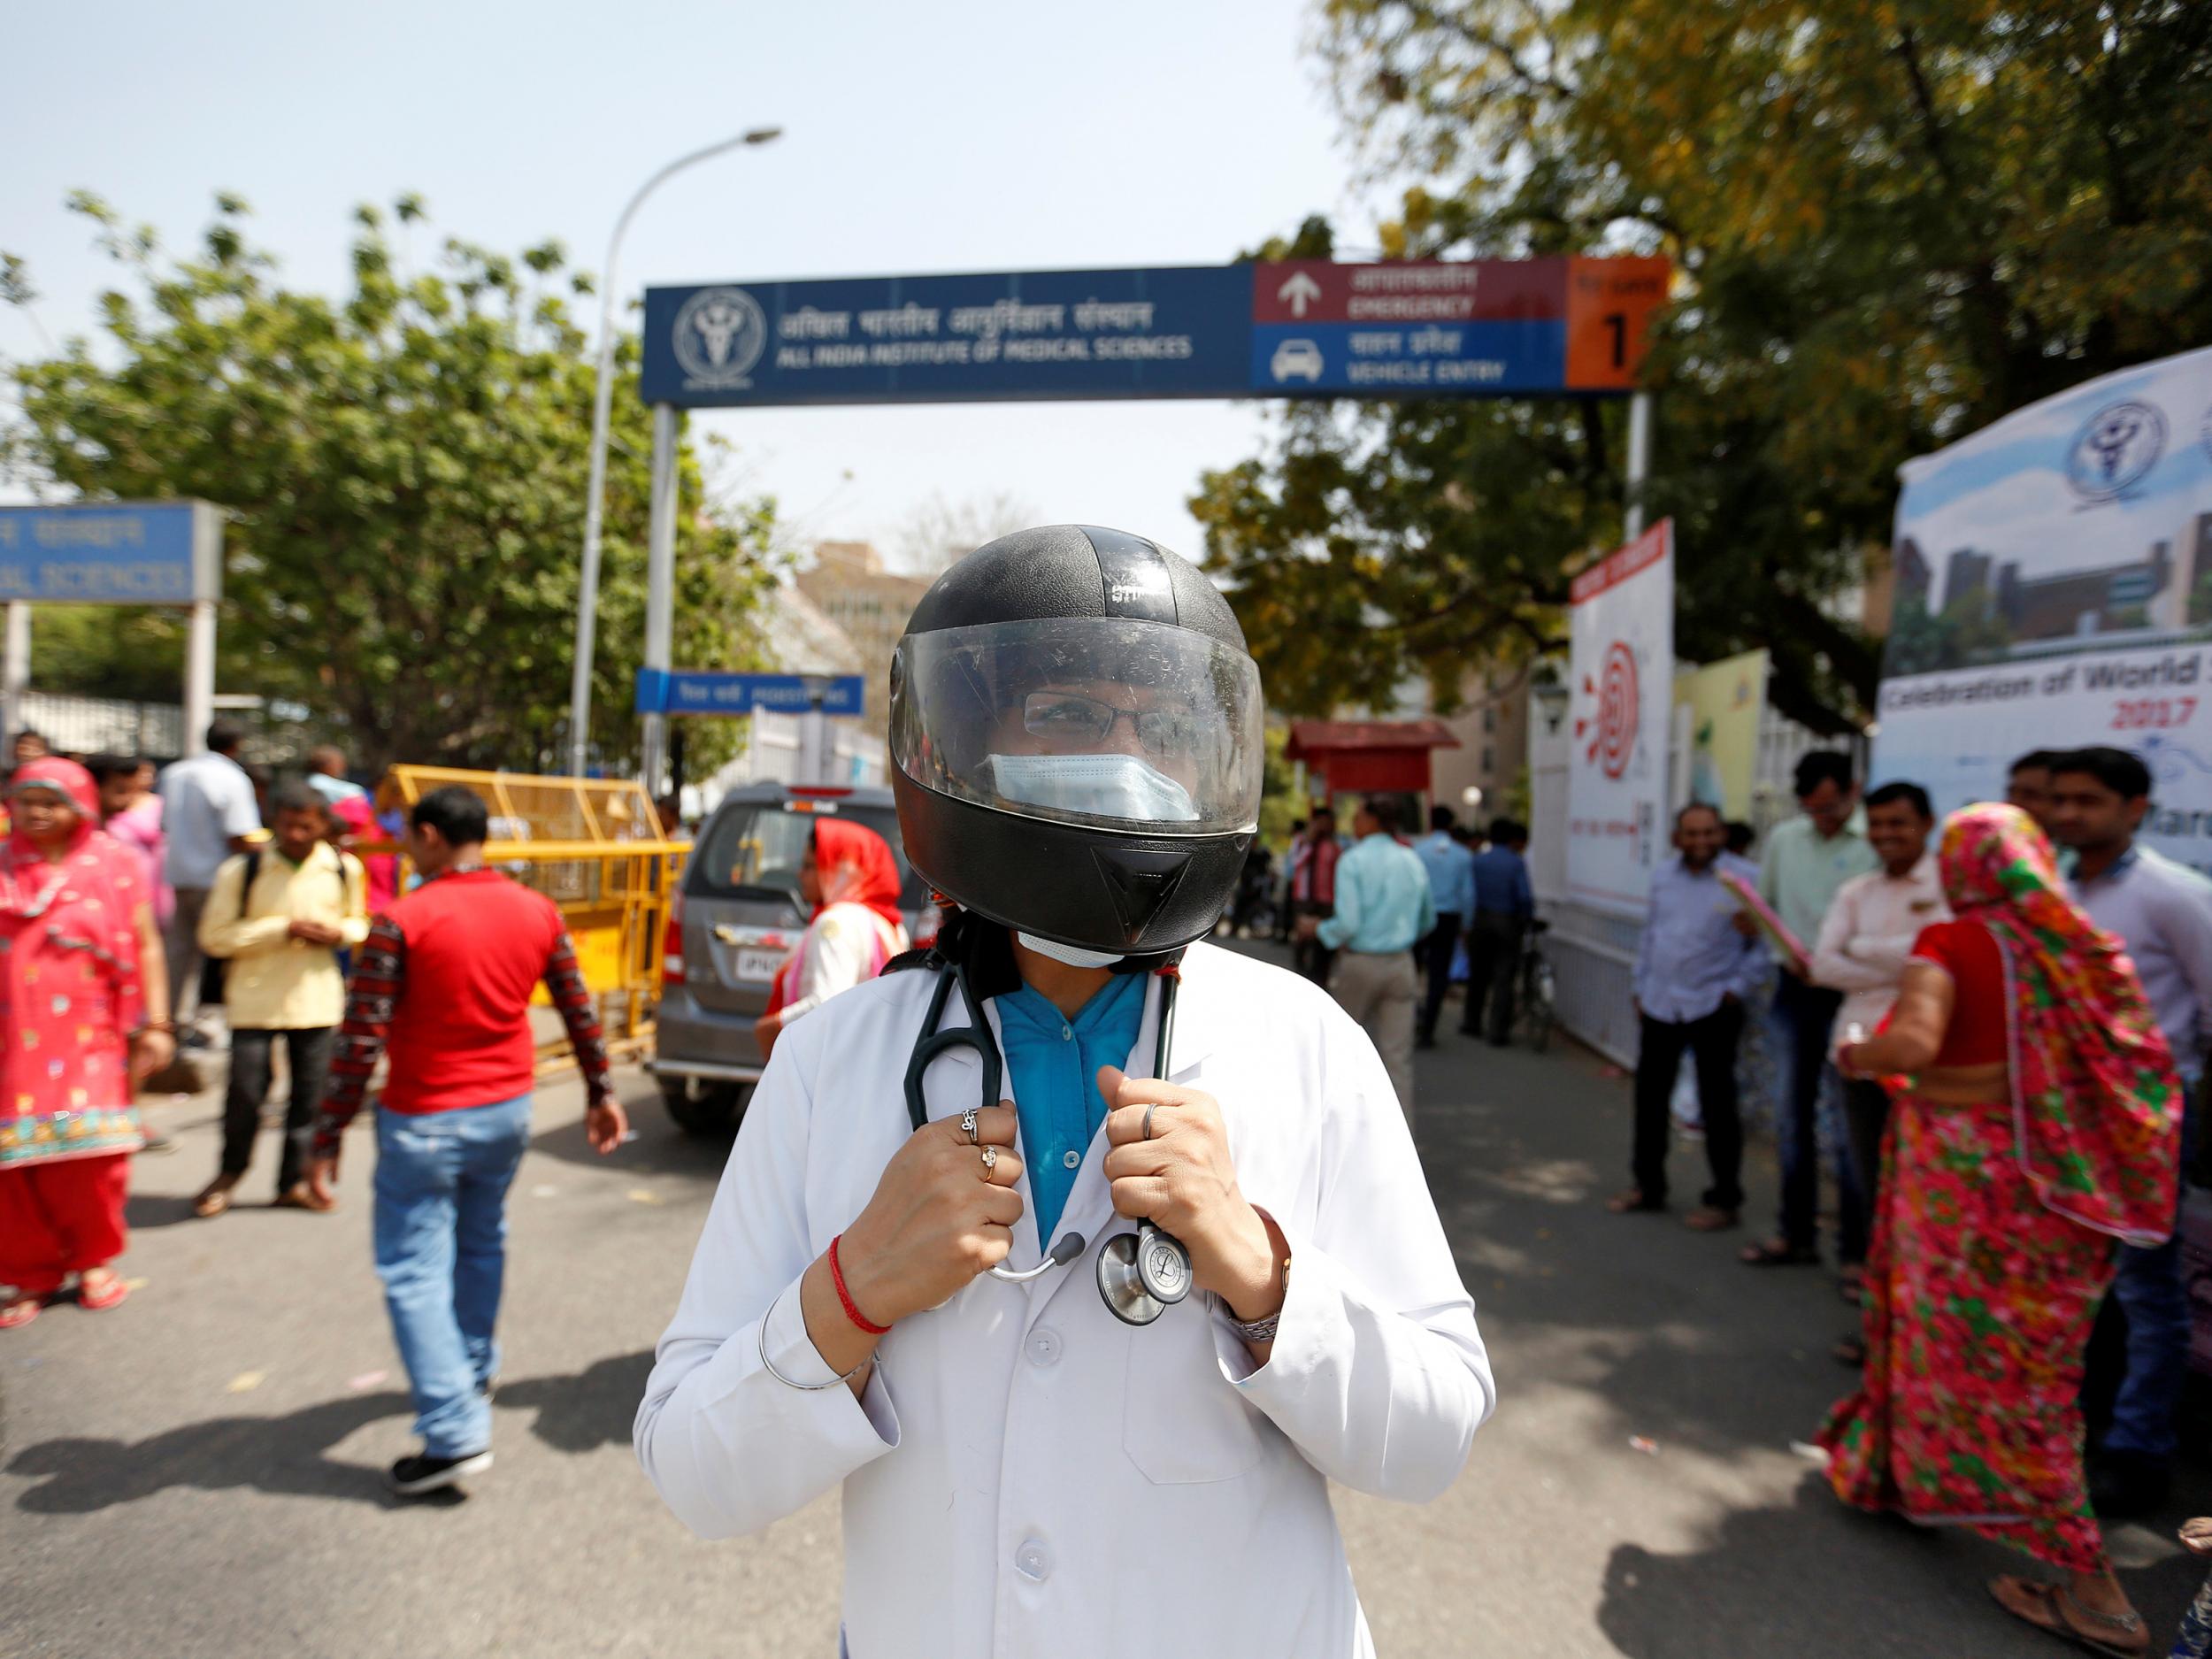 A doctor protests the lack of security offered to medical professionals on 23 March outside the All India Institute Of Medical Sciences (AIIMS) in New Delhi, India